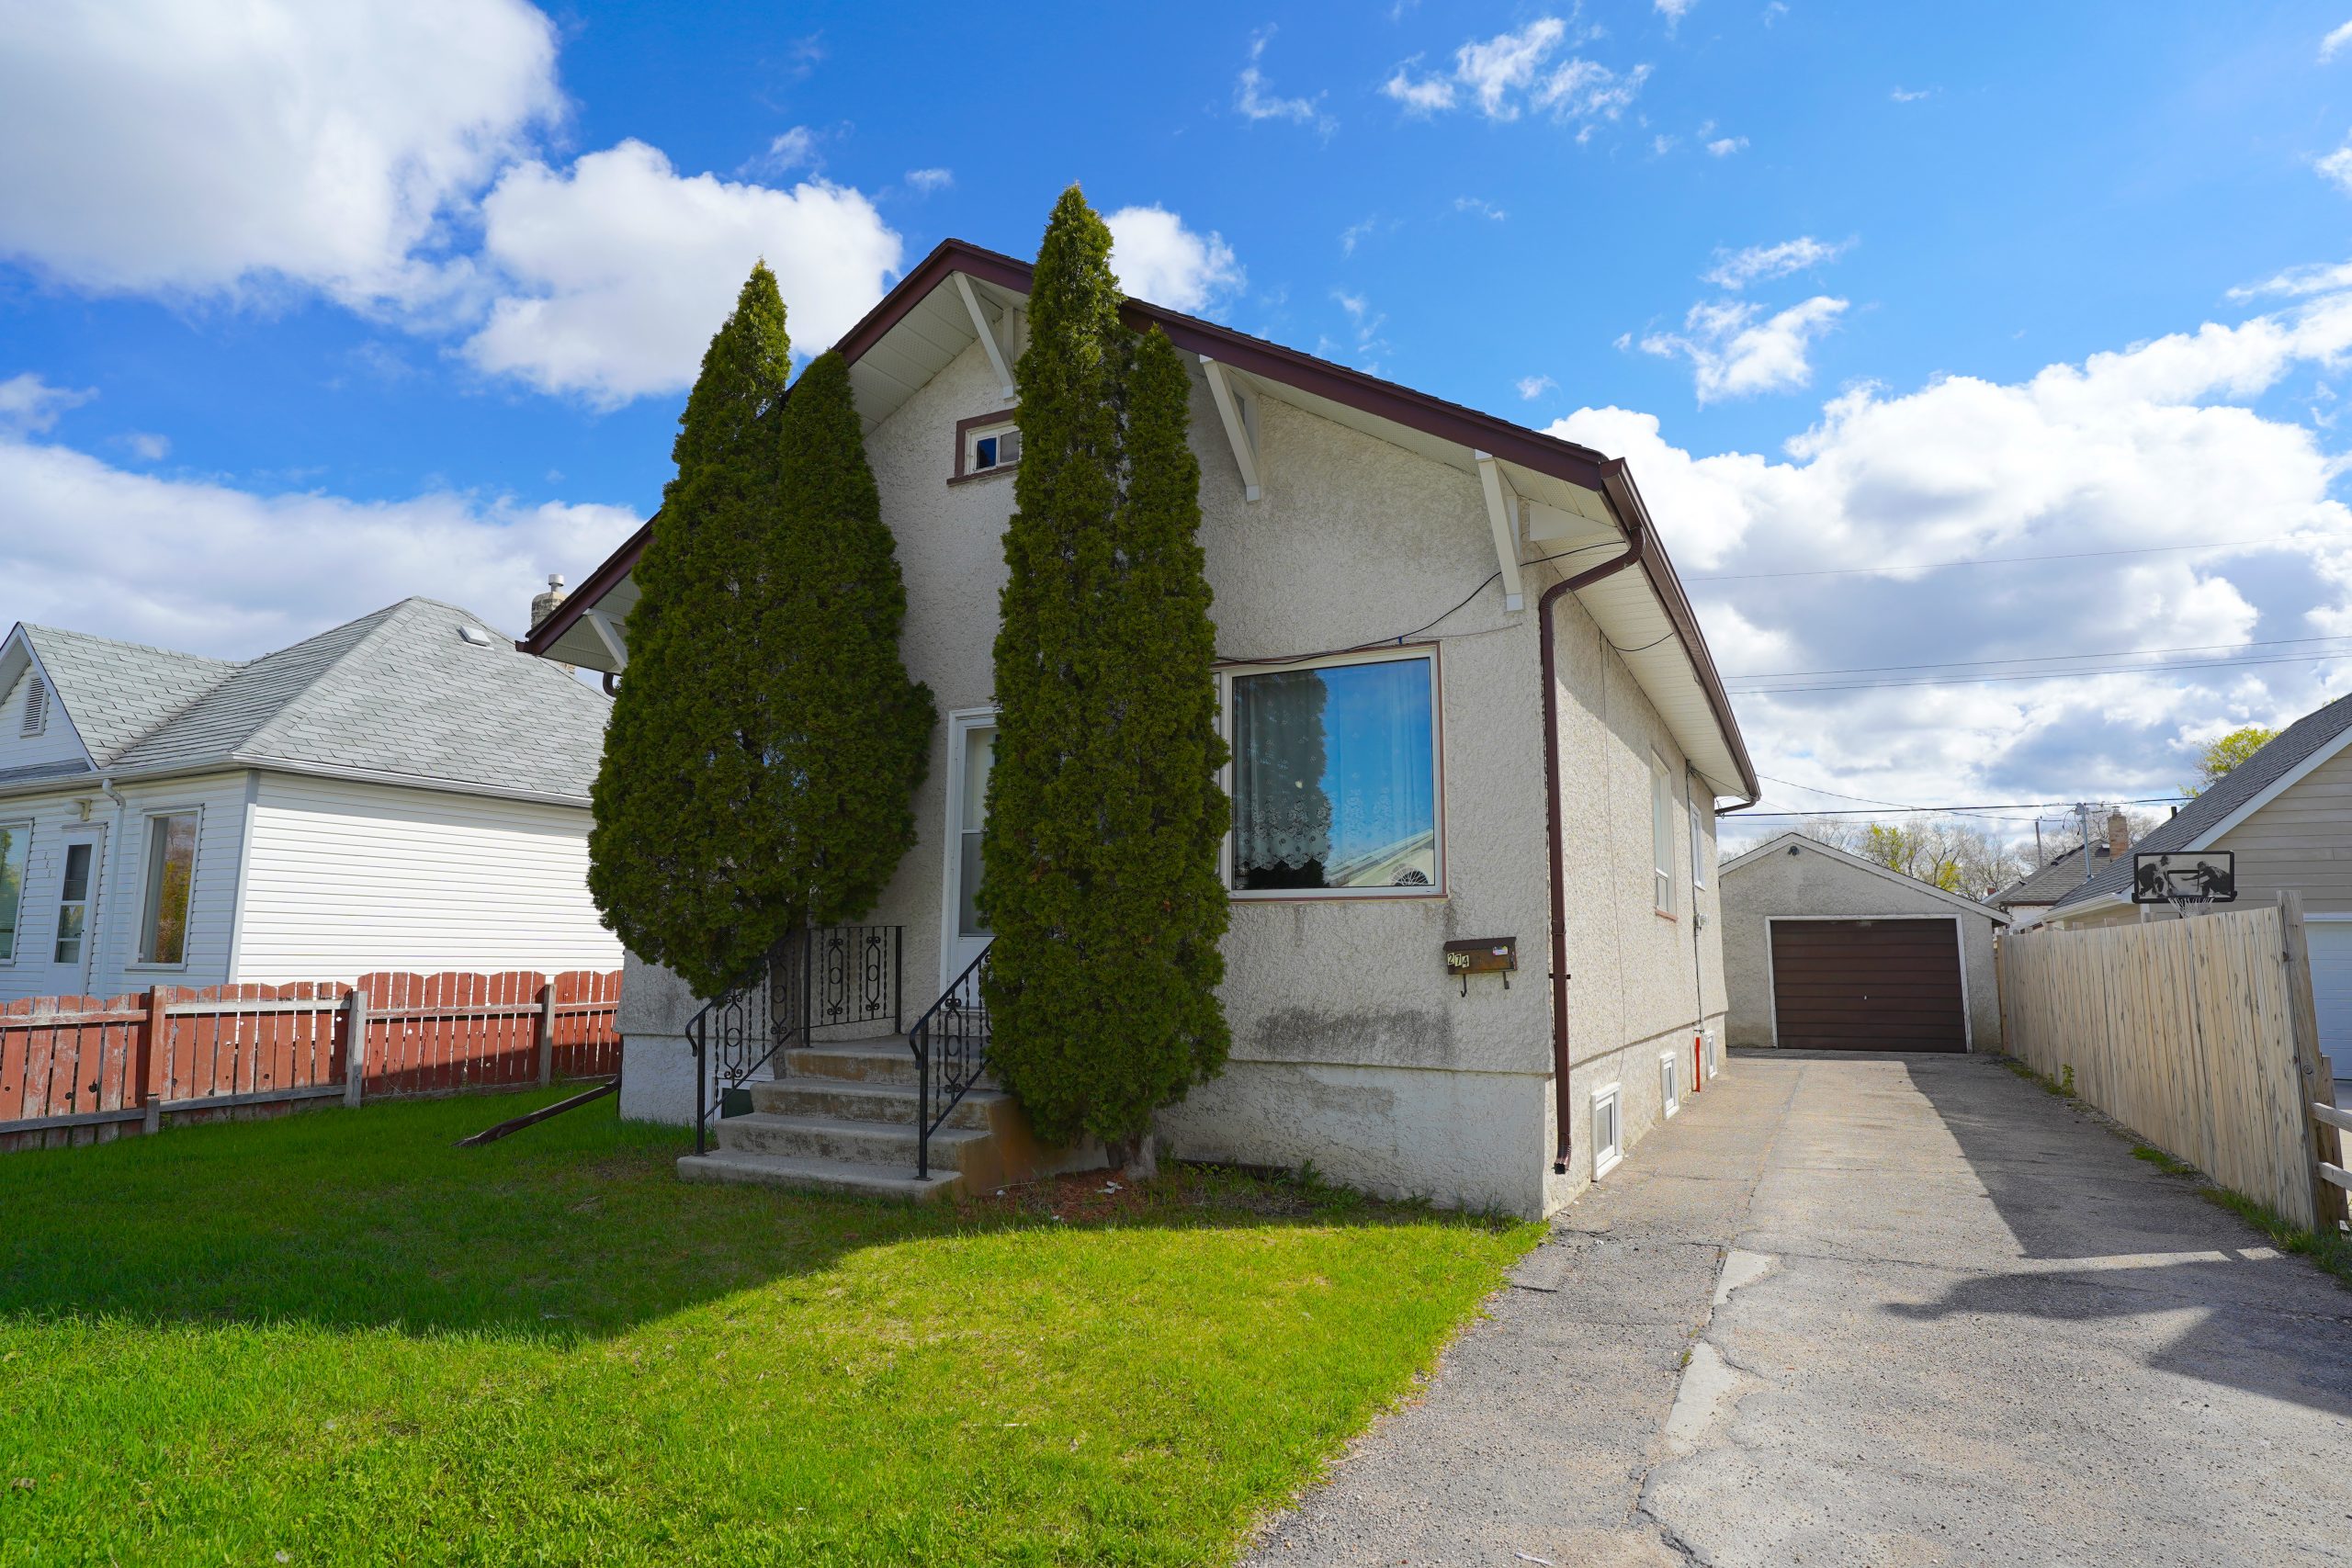 274 Bowman Ave – Coming to Market